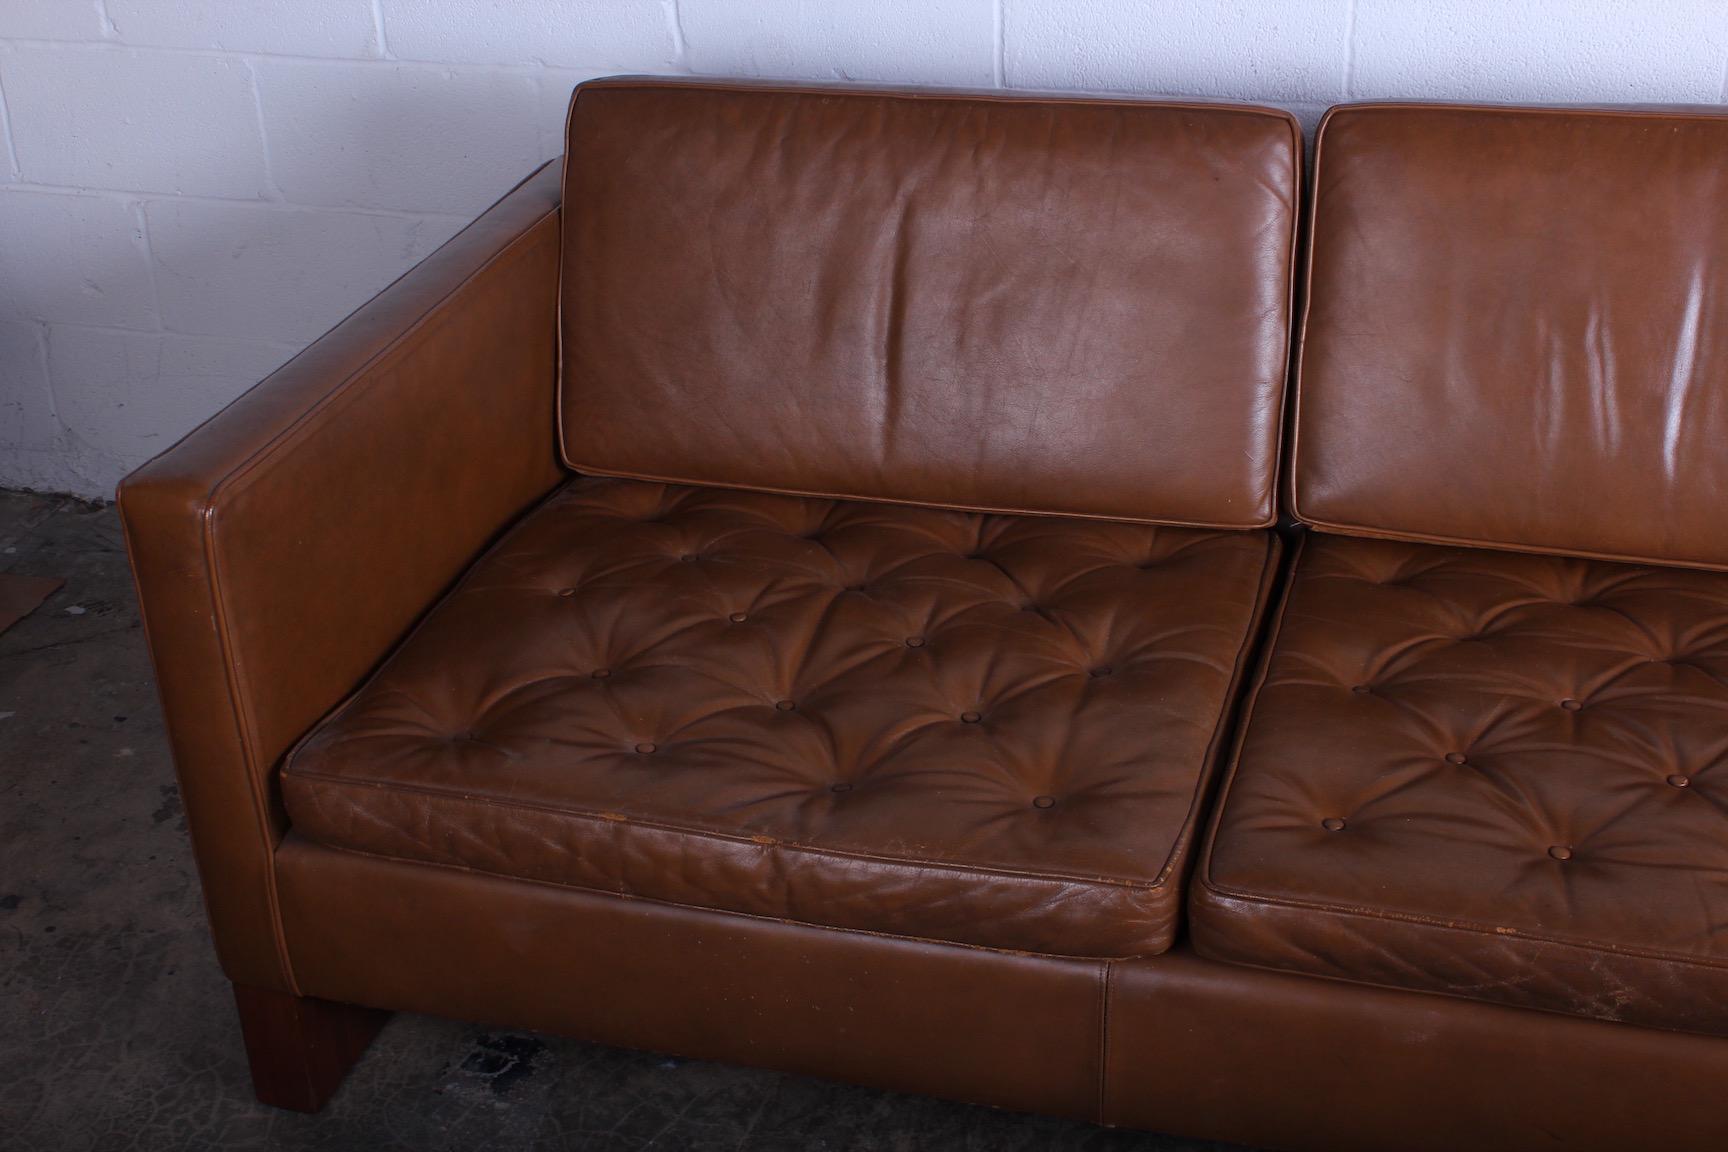 Leather Sofa Designed by Mies van der Rohe for Knoll For Sale at 1stDibs |  mies sofa, mies van der rohe leather sofa, mies van der rohe sofa